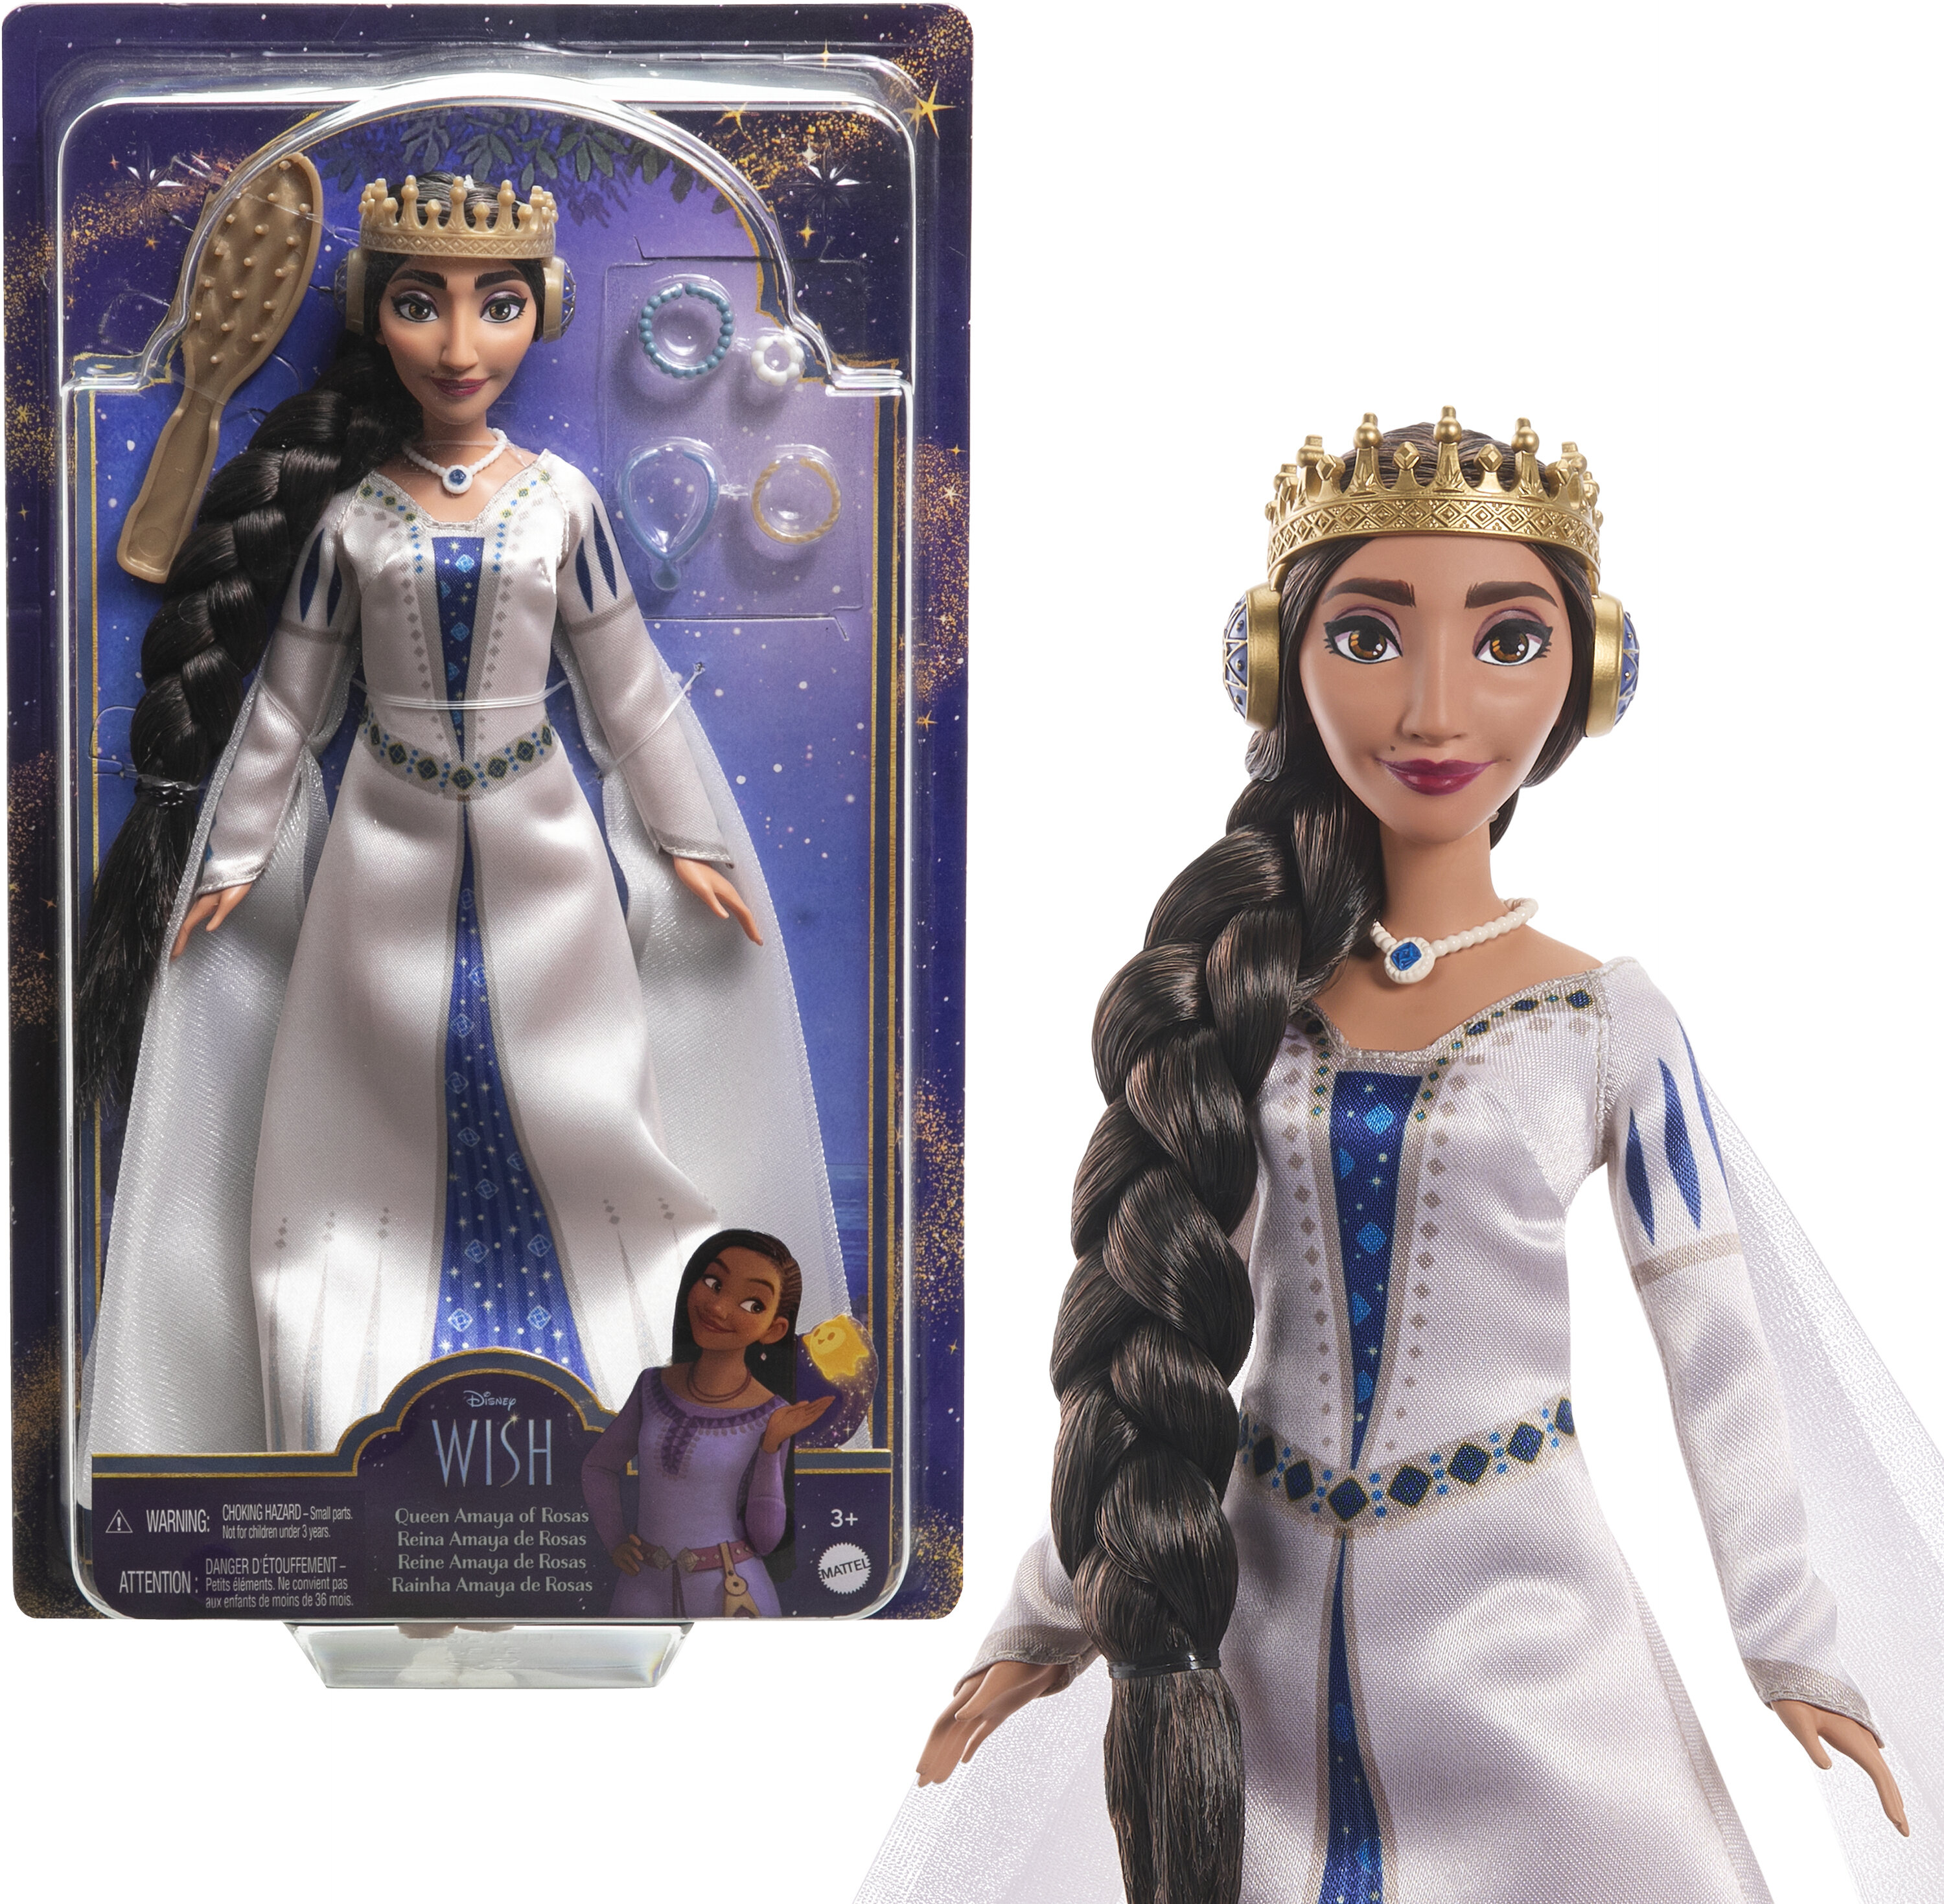 Disney Wish Queen Amaya of Rosas 11 inch Fashion Doll, Posable Doll & Accessories - image 1 of 7